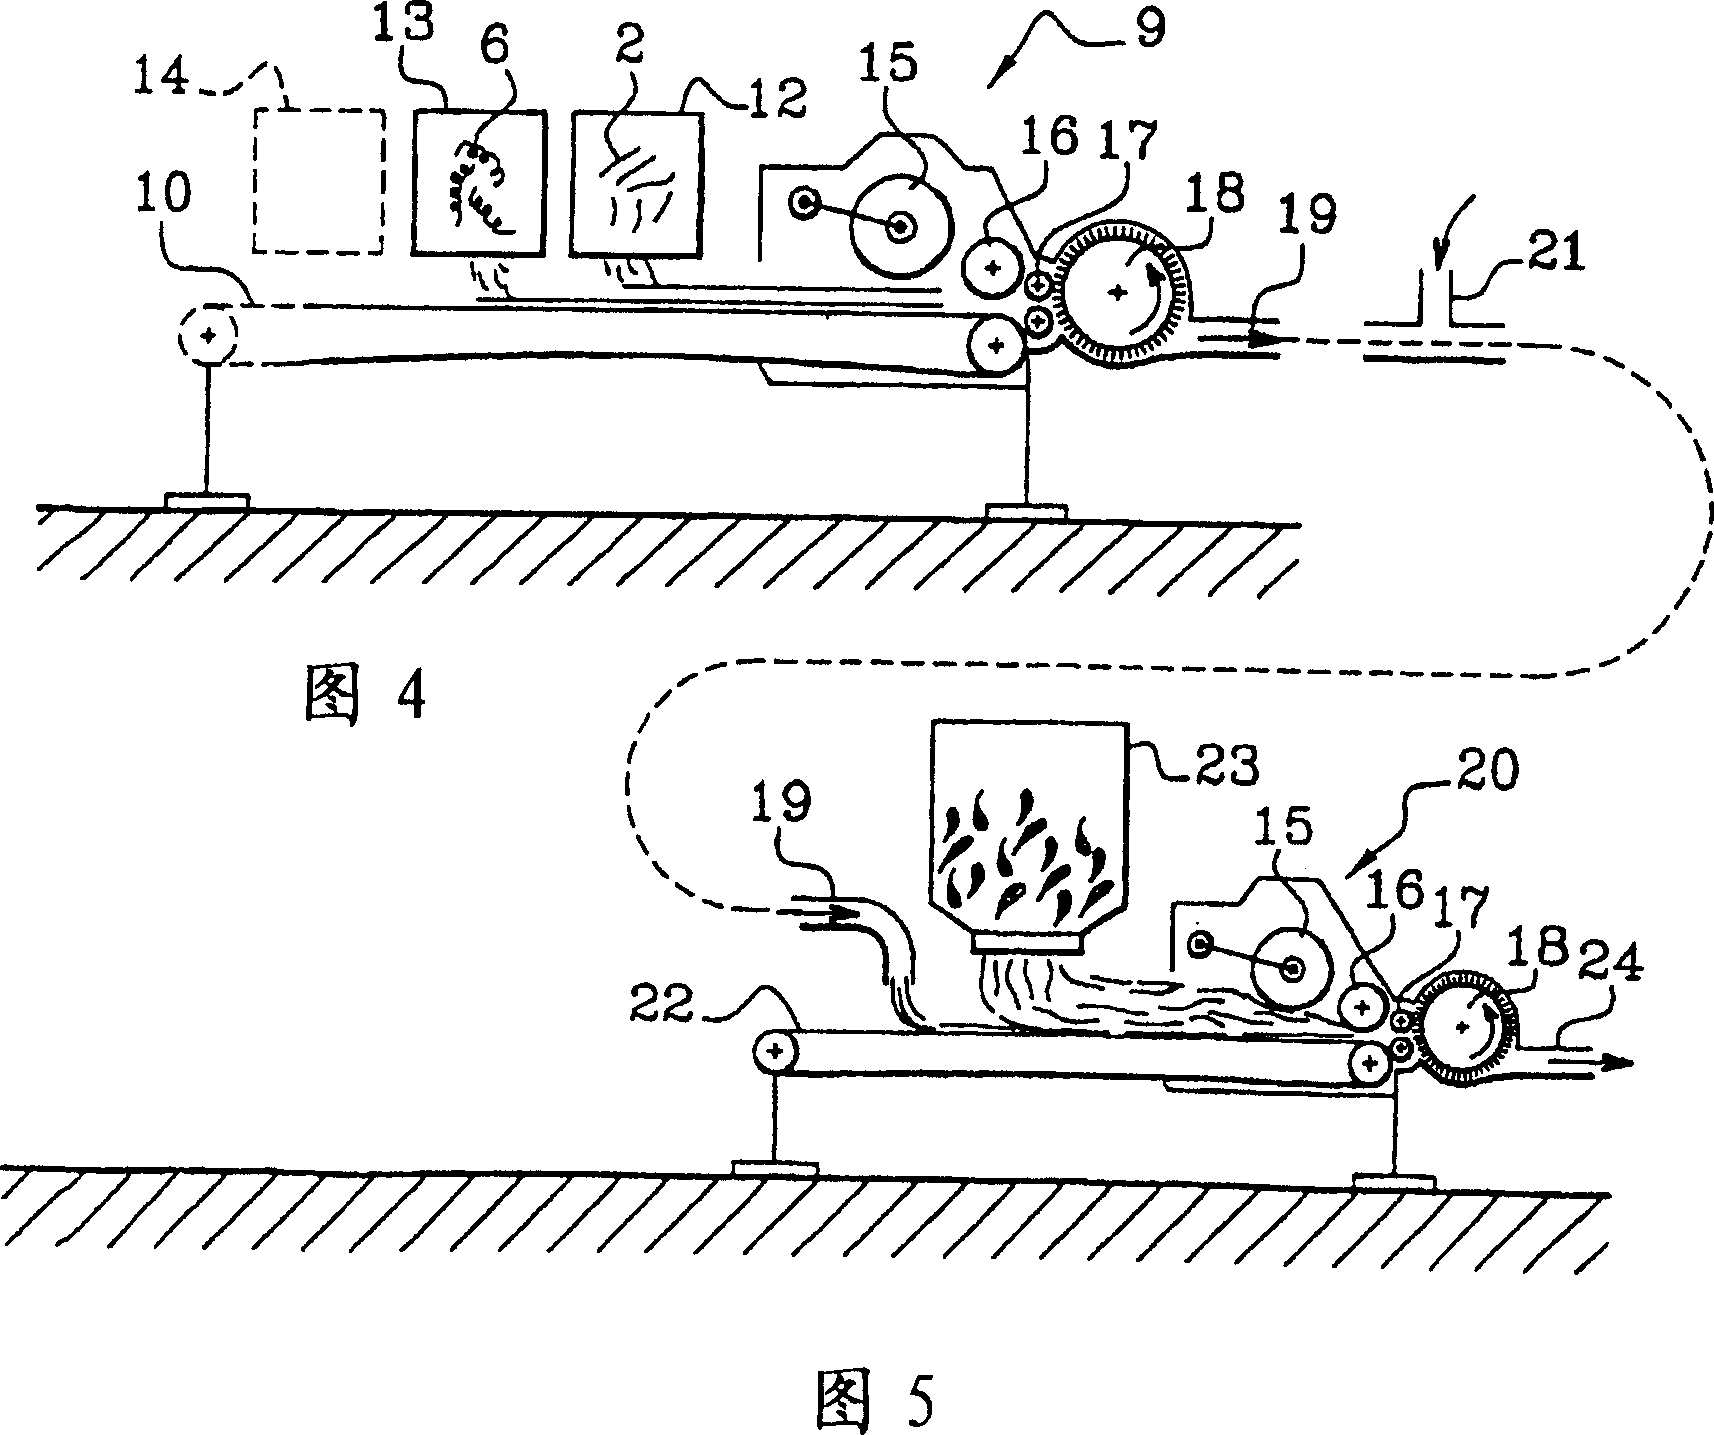 Feather-based padding product, preparation method and installation for implementing said method